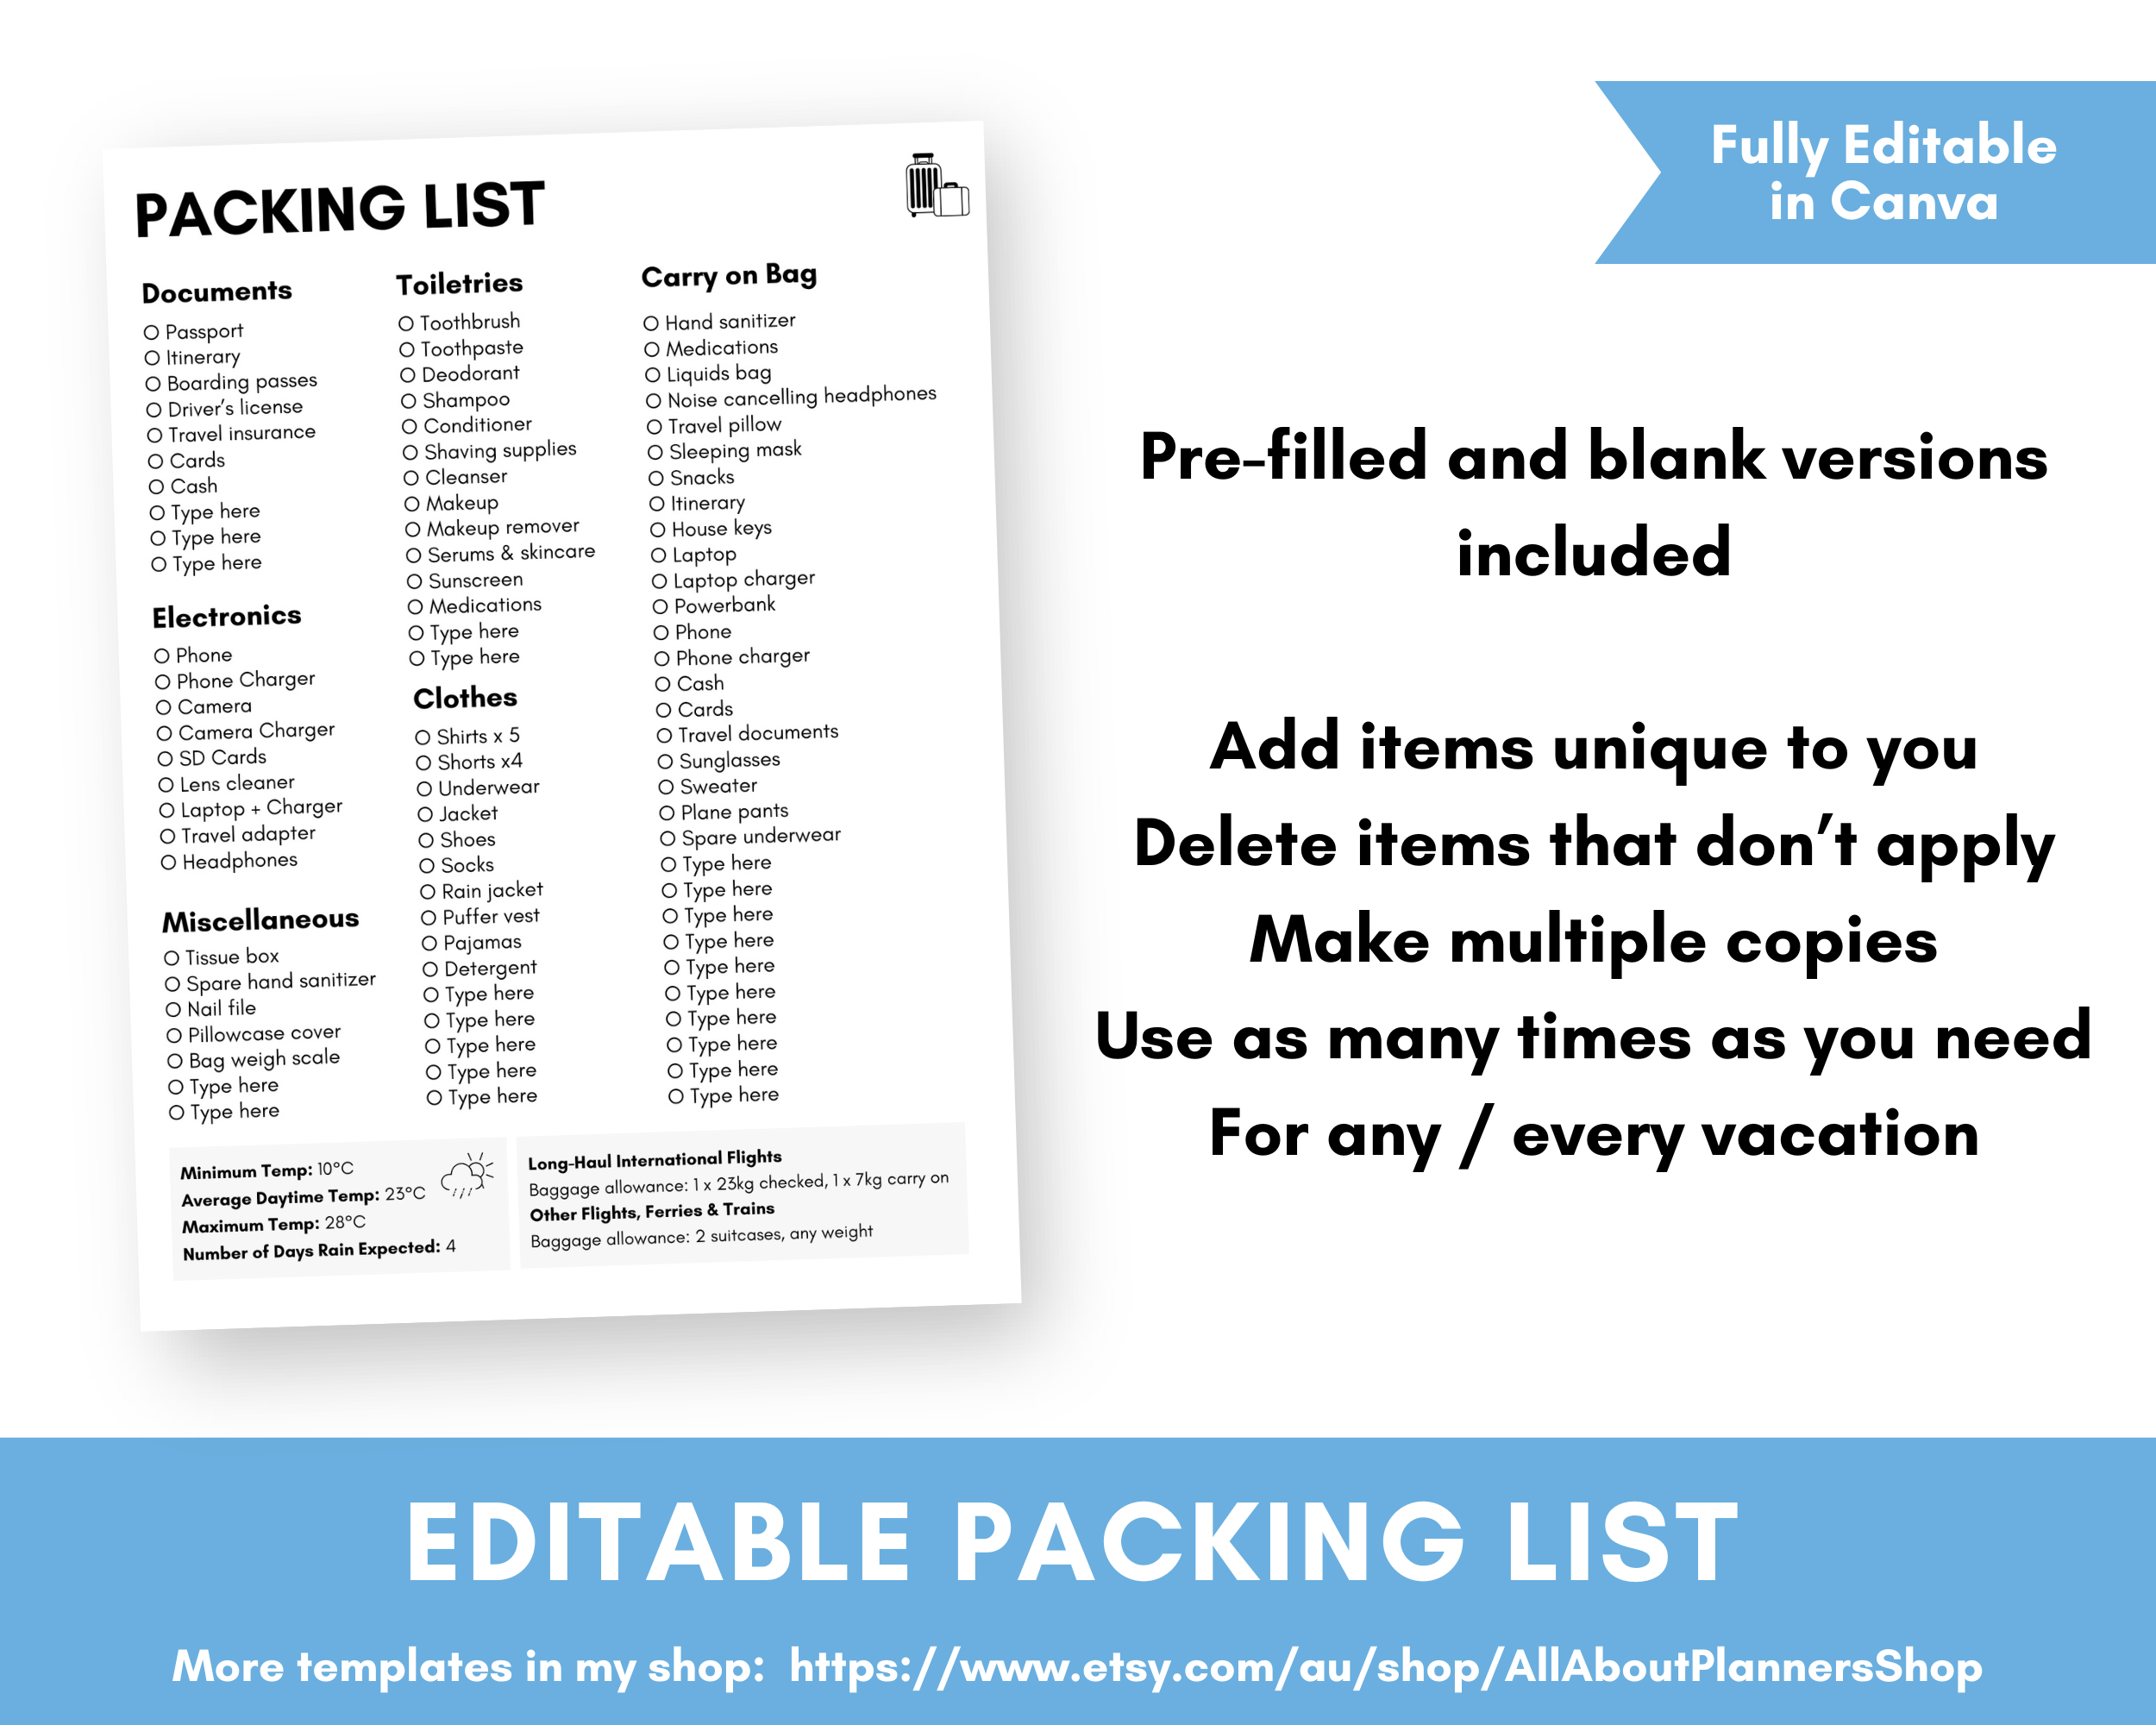 packing list printable for travel vacation trip holiday fully editable customisable in canva simple minimalist digital checklist